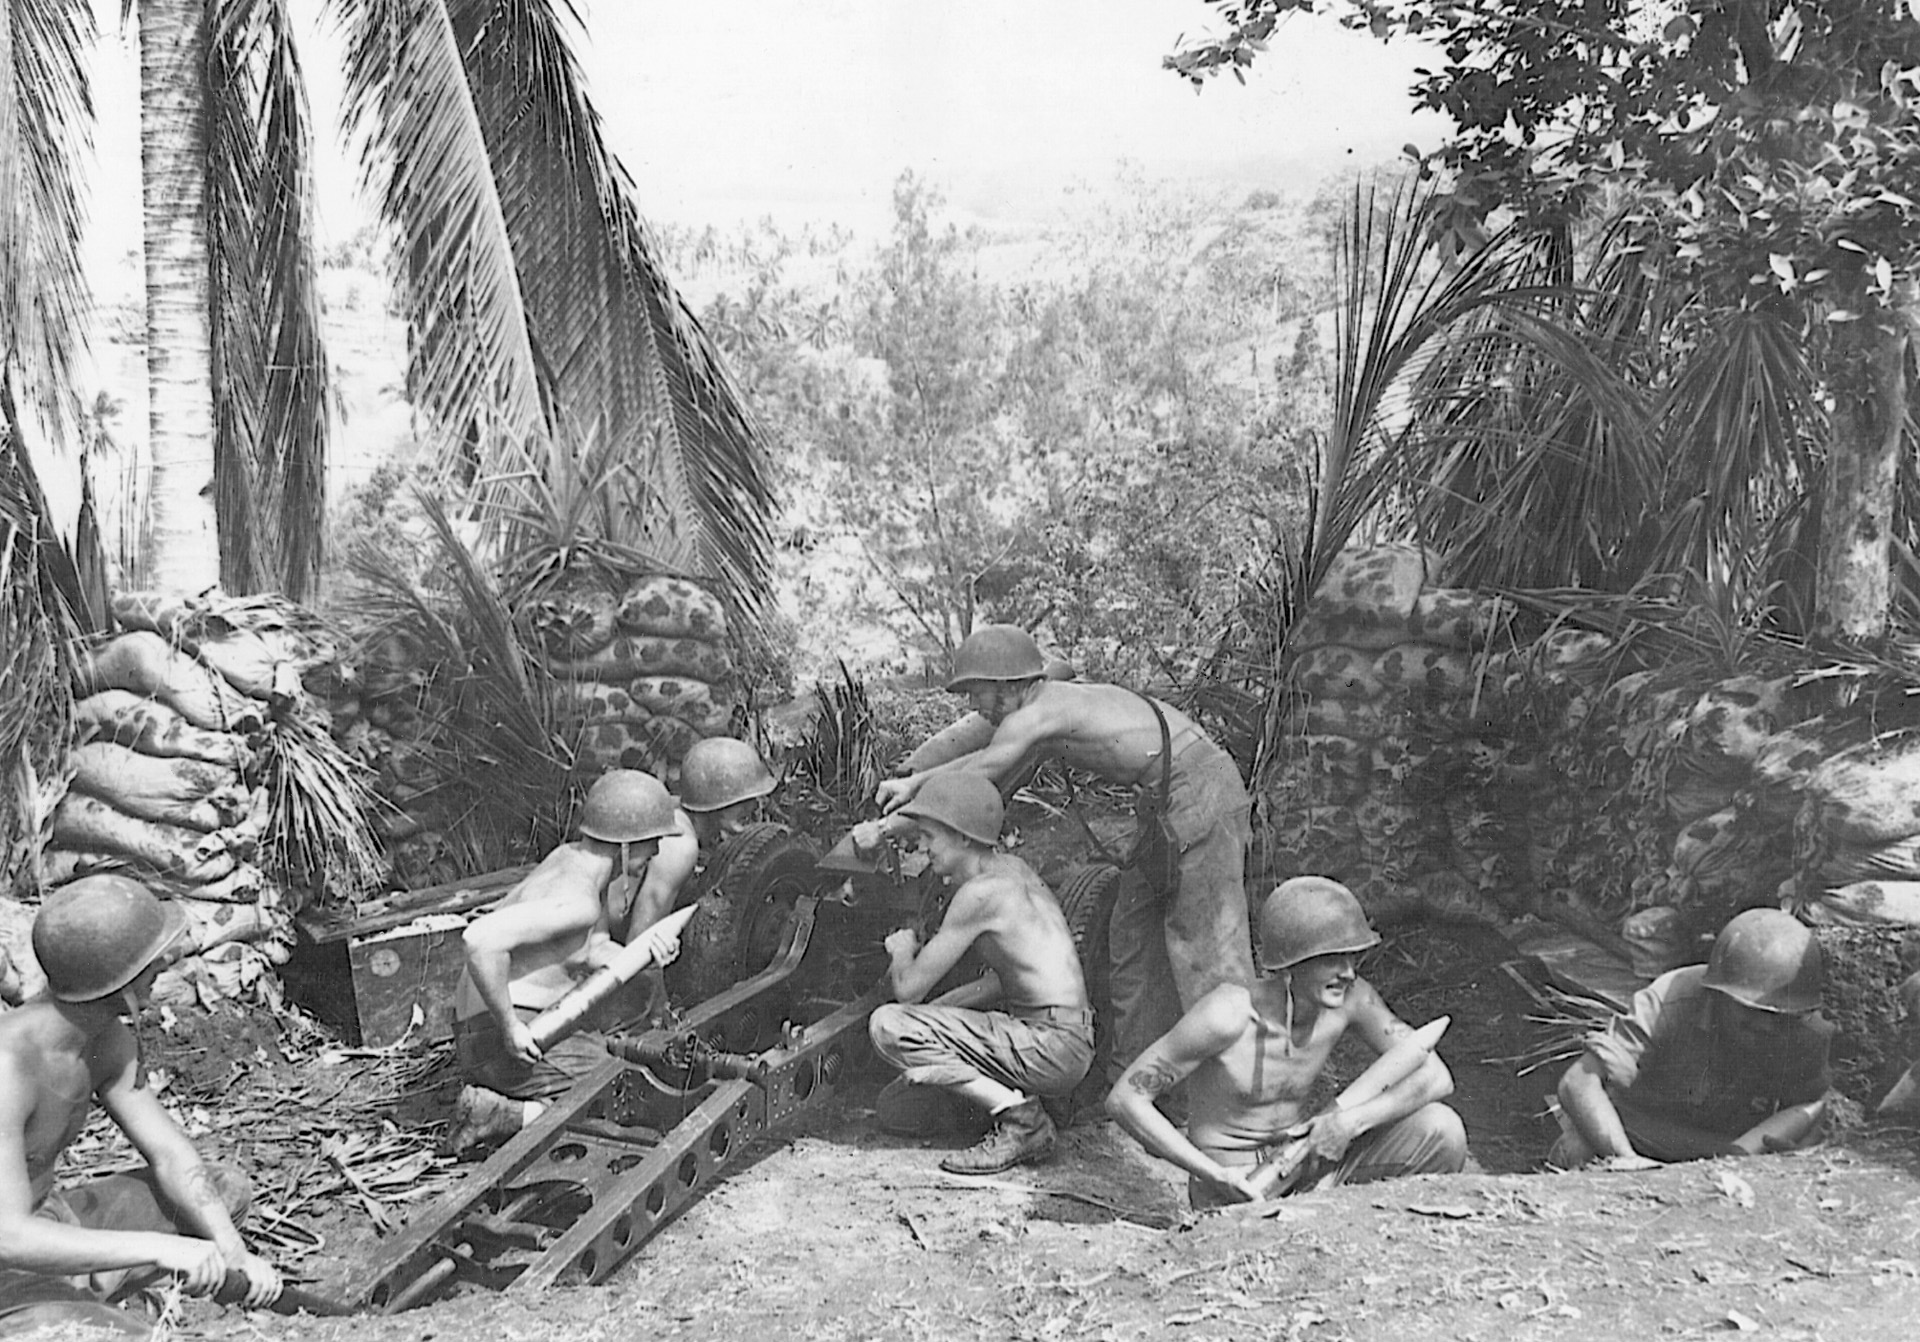 In a position formerly held by the Japanese, Marines prepare a field artillery piece for the coming action.